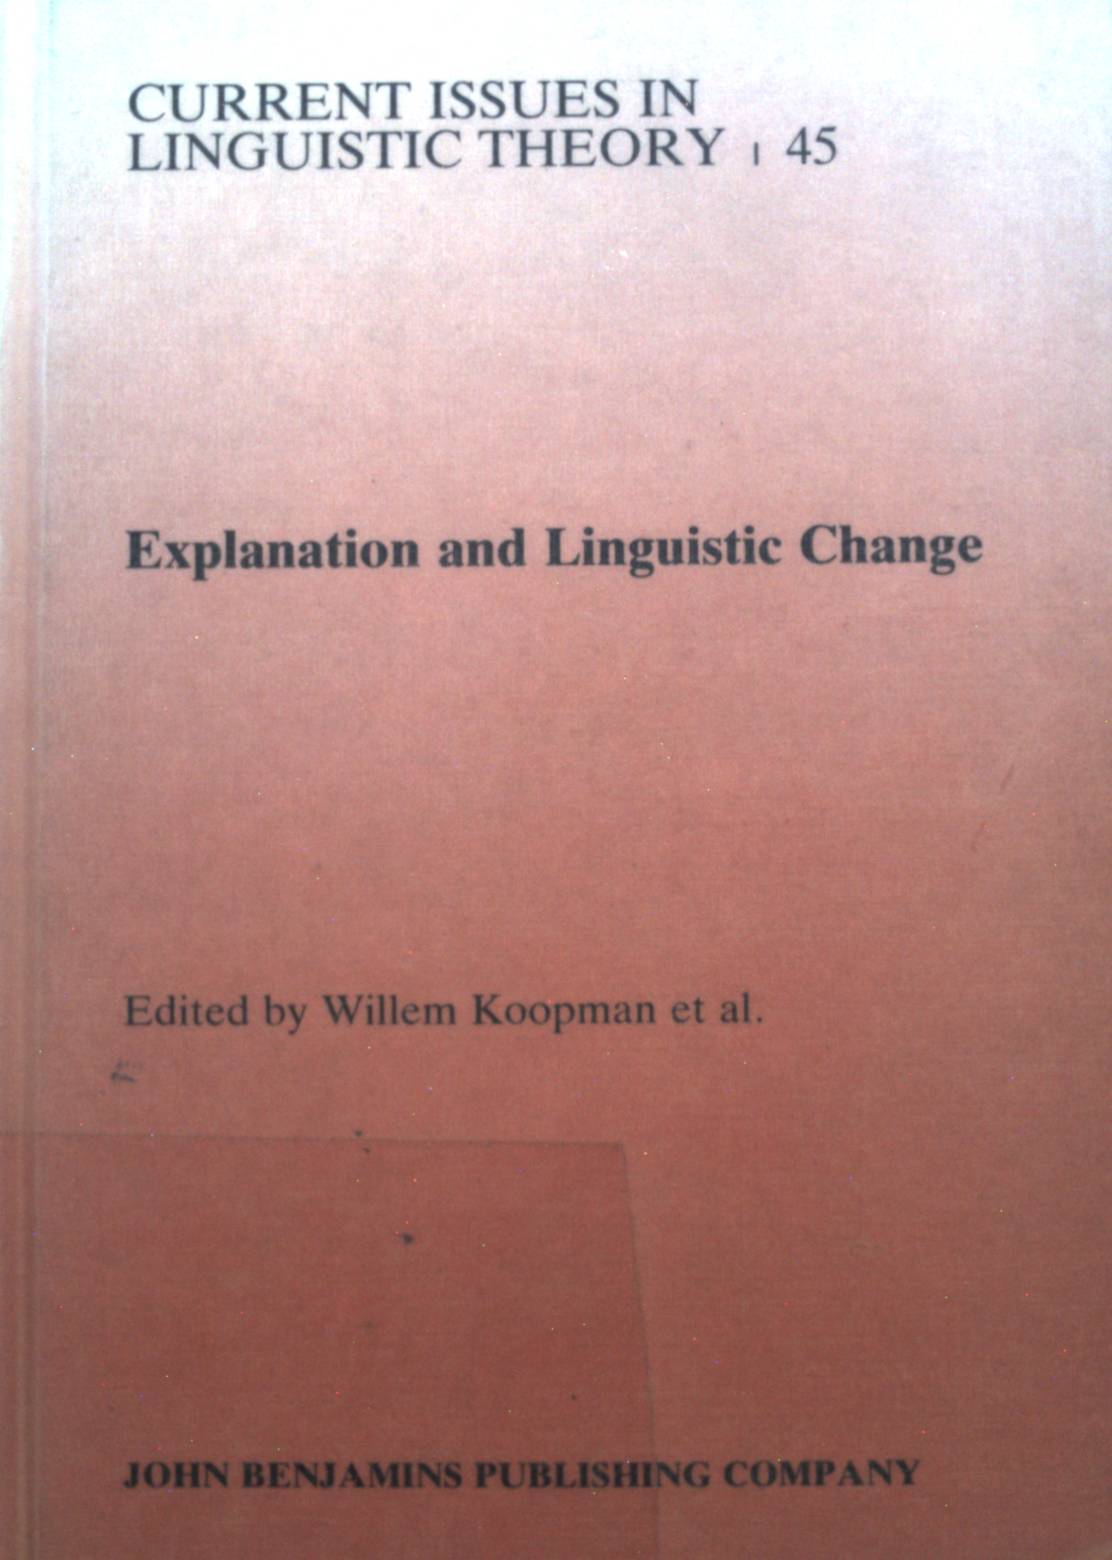 Explanation and Linguistic Change. Amsterdam Studies in the Theory & History of Linguistic Science: Series Iv: Current Issues in Linguistic Theory, Vol. 45 - Koopman, Willem F.